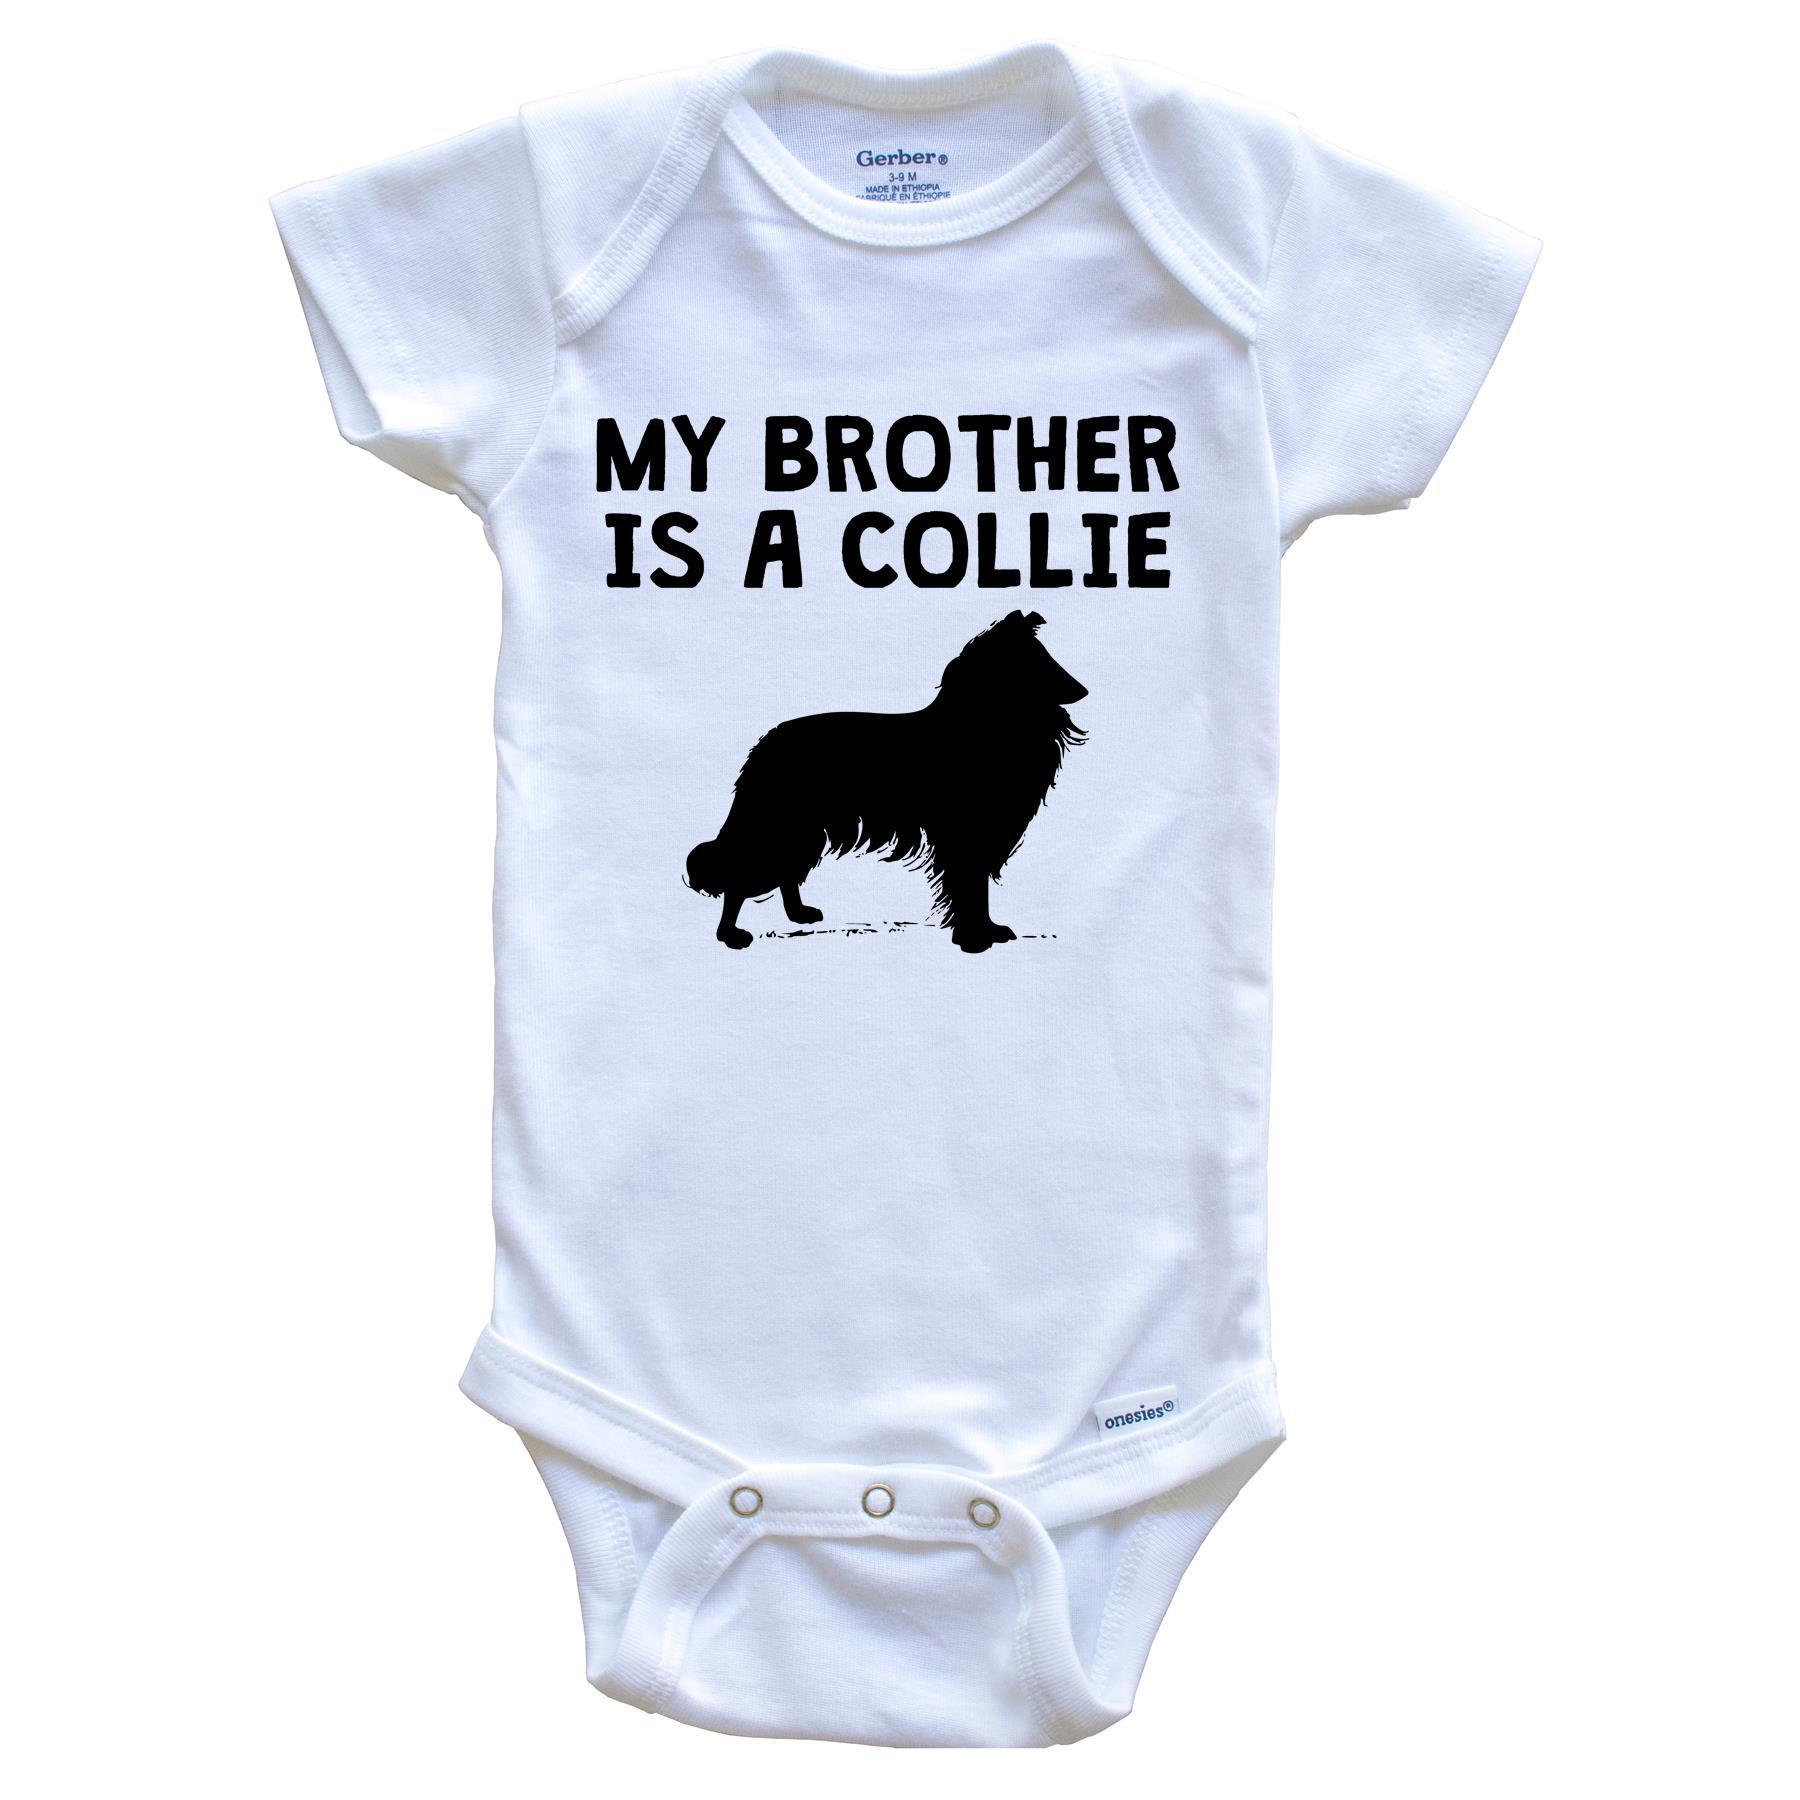 My Brother Is A Collie Baby Onesie